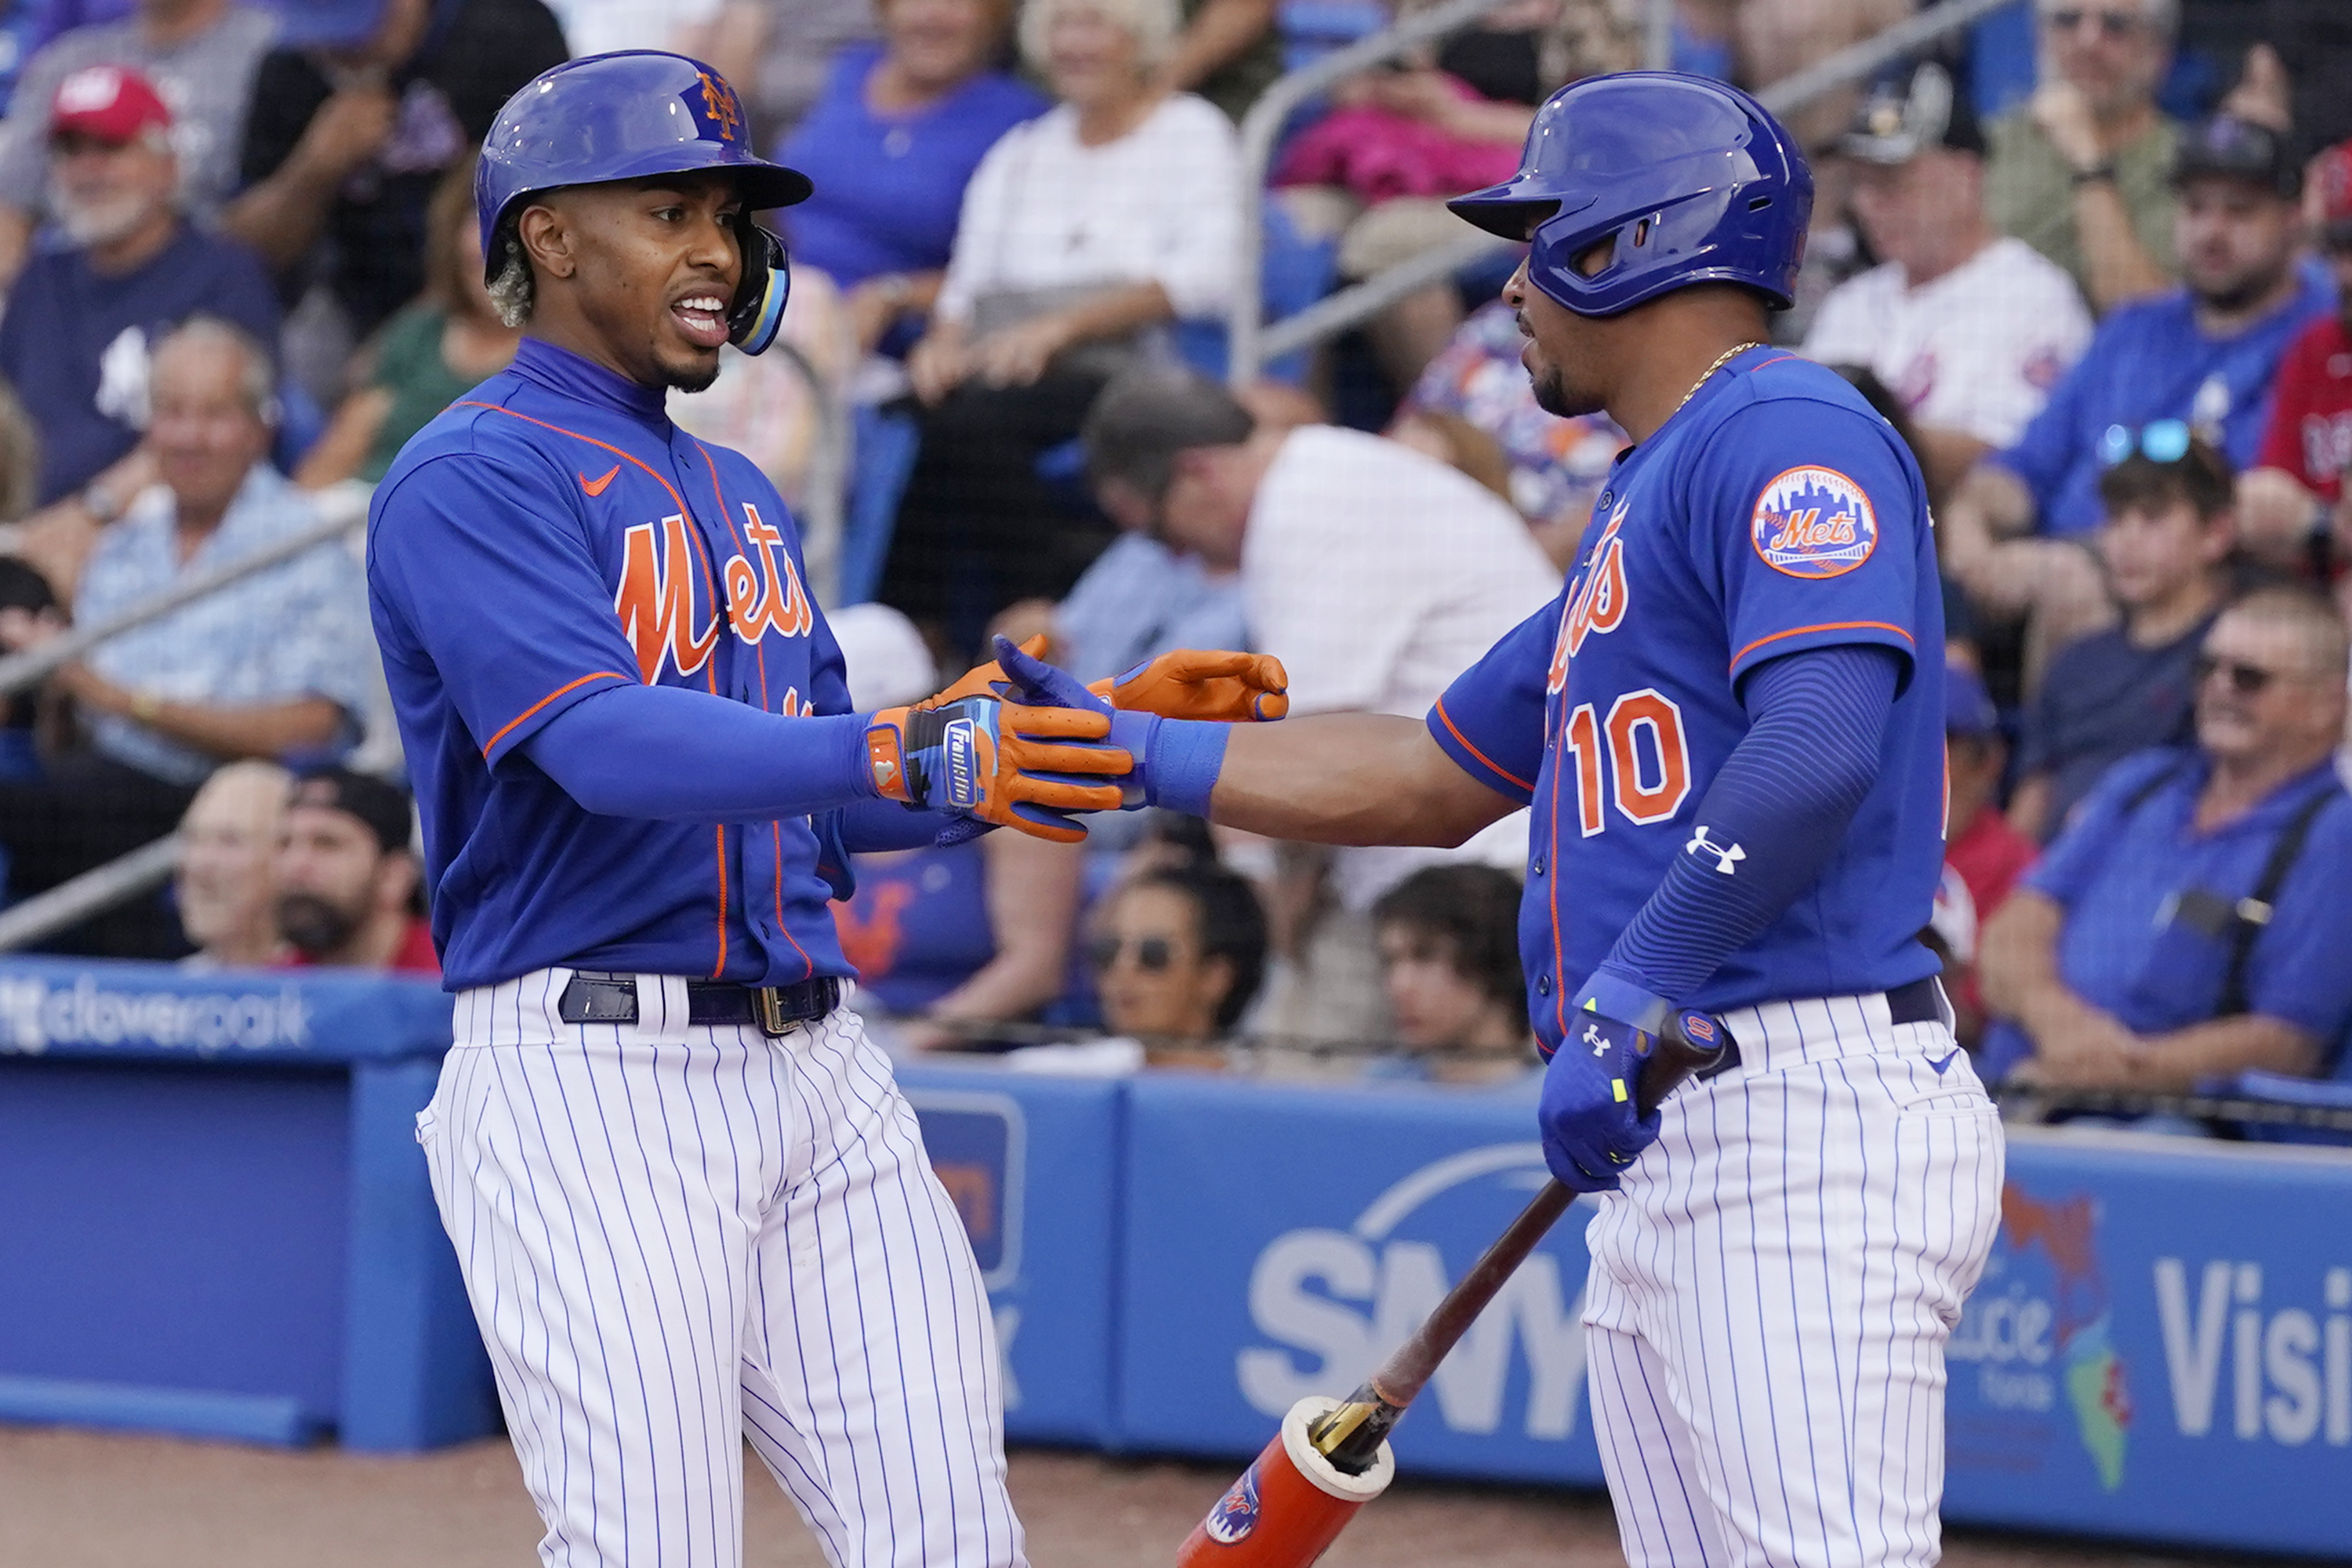 Mets' Starling Marte shows good signs at spring training 